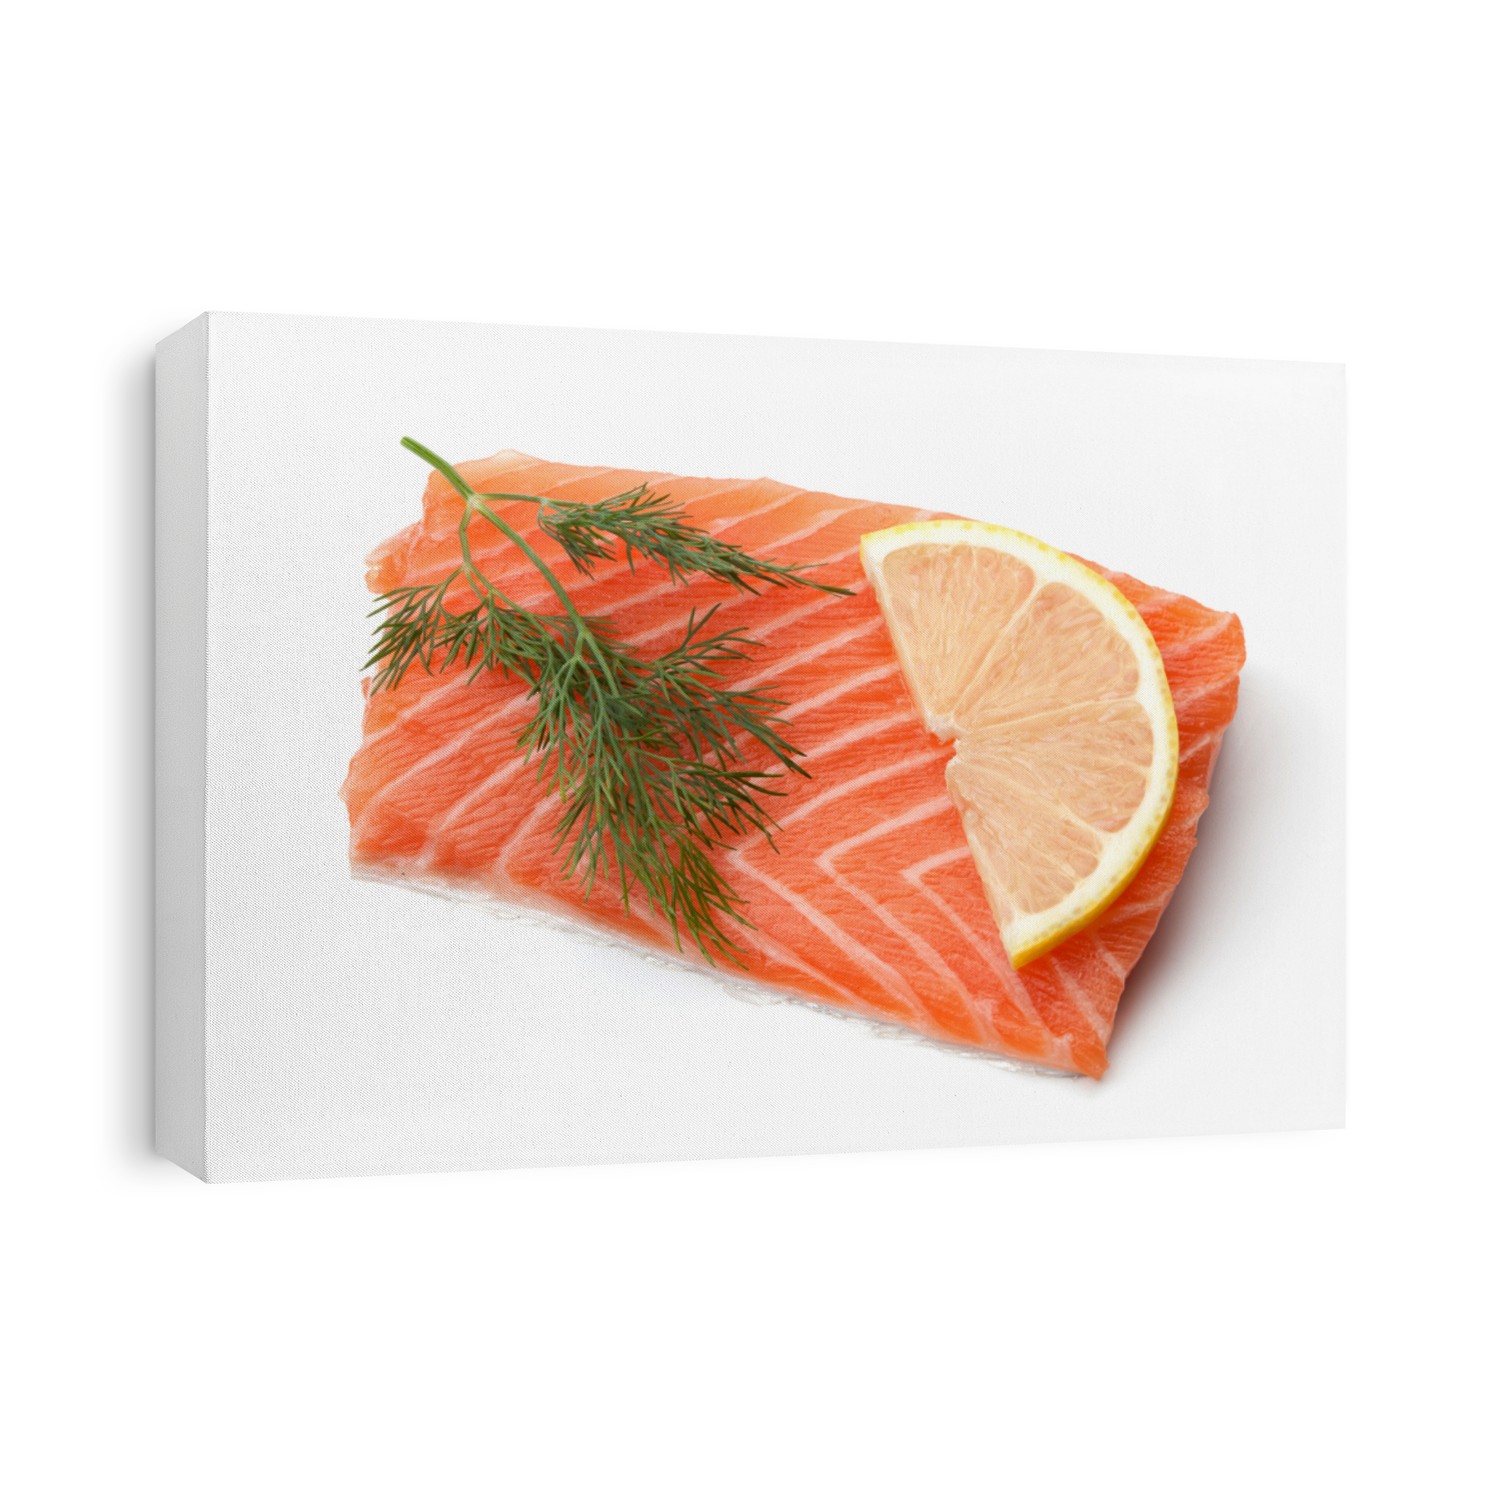 Fresh salmon steak with lemon slice and dill. Isolated on white background